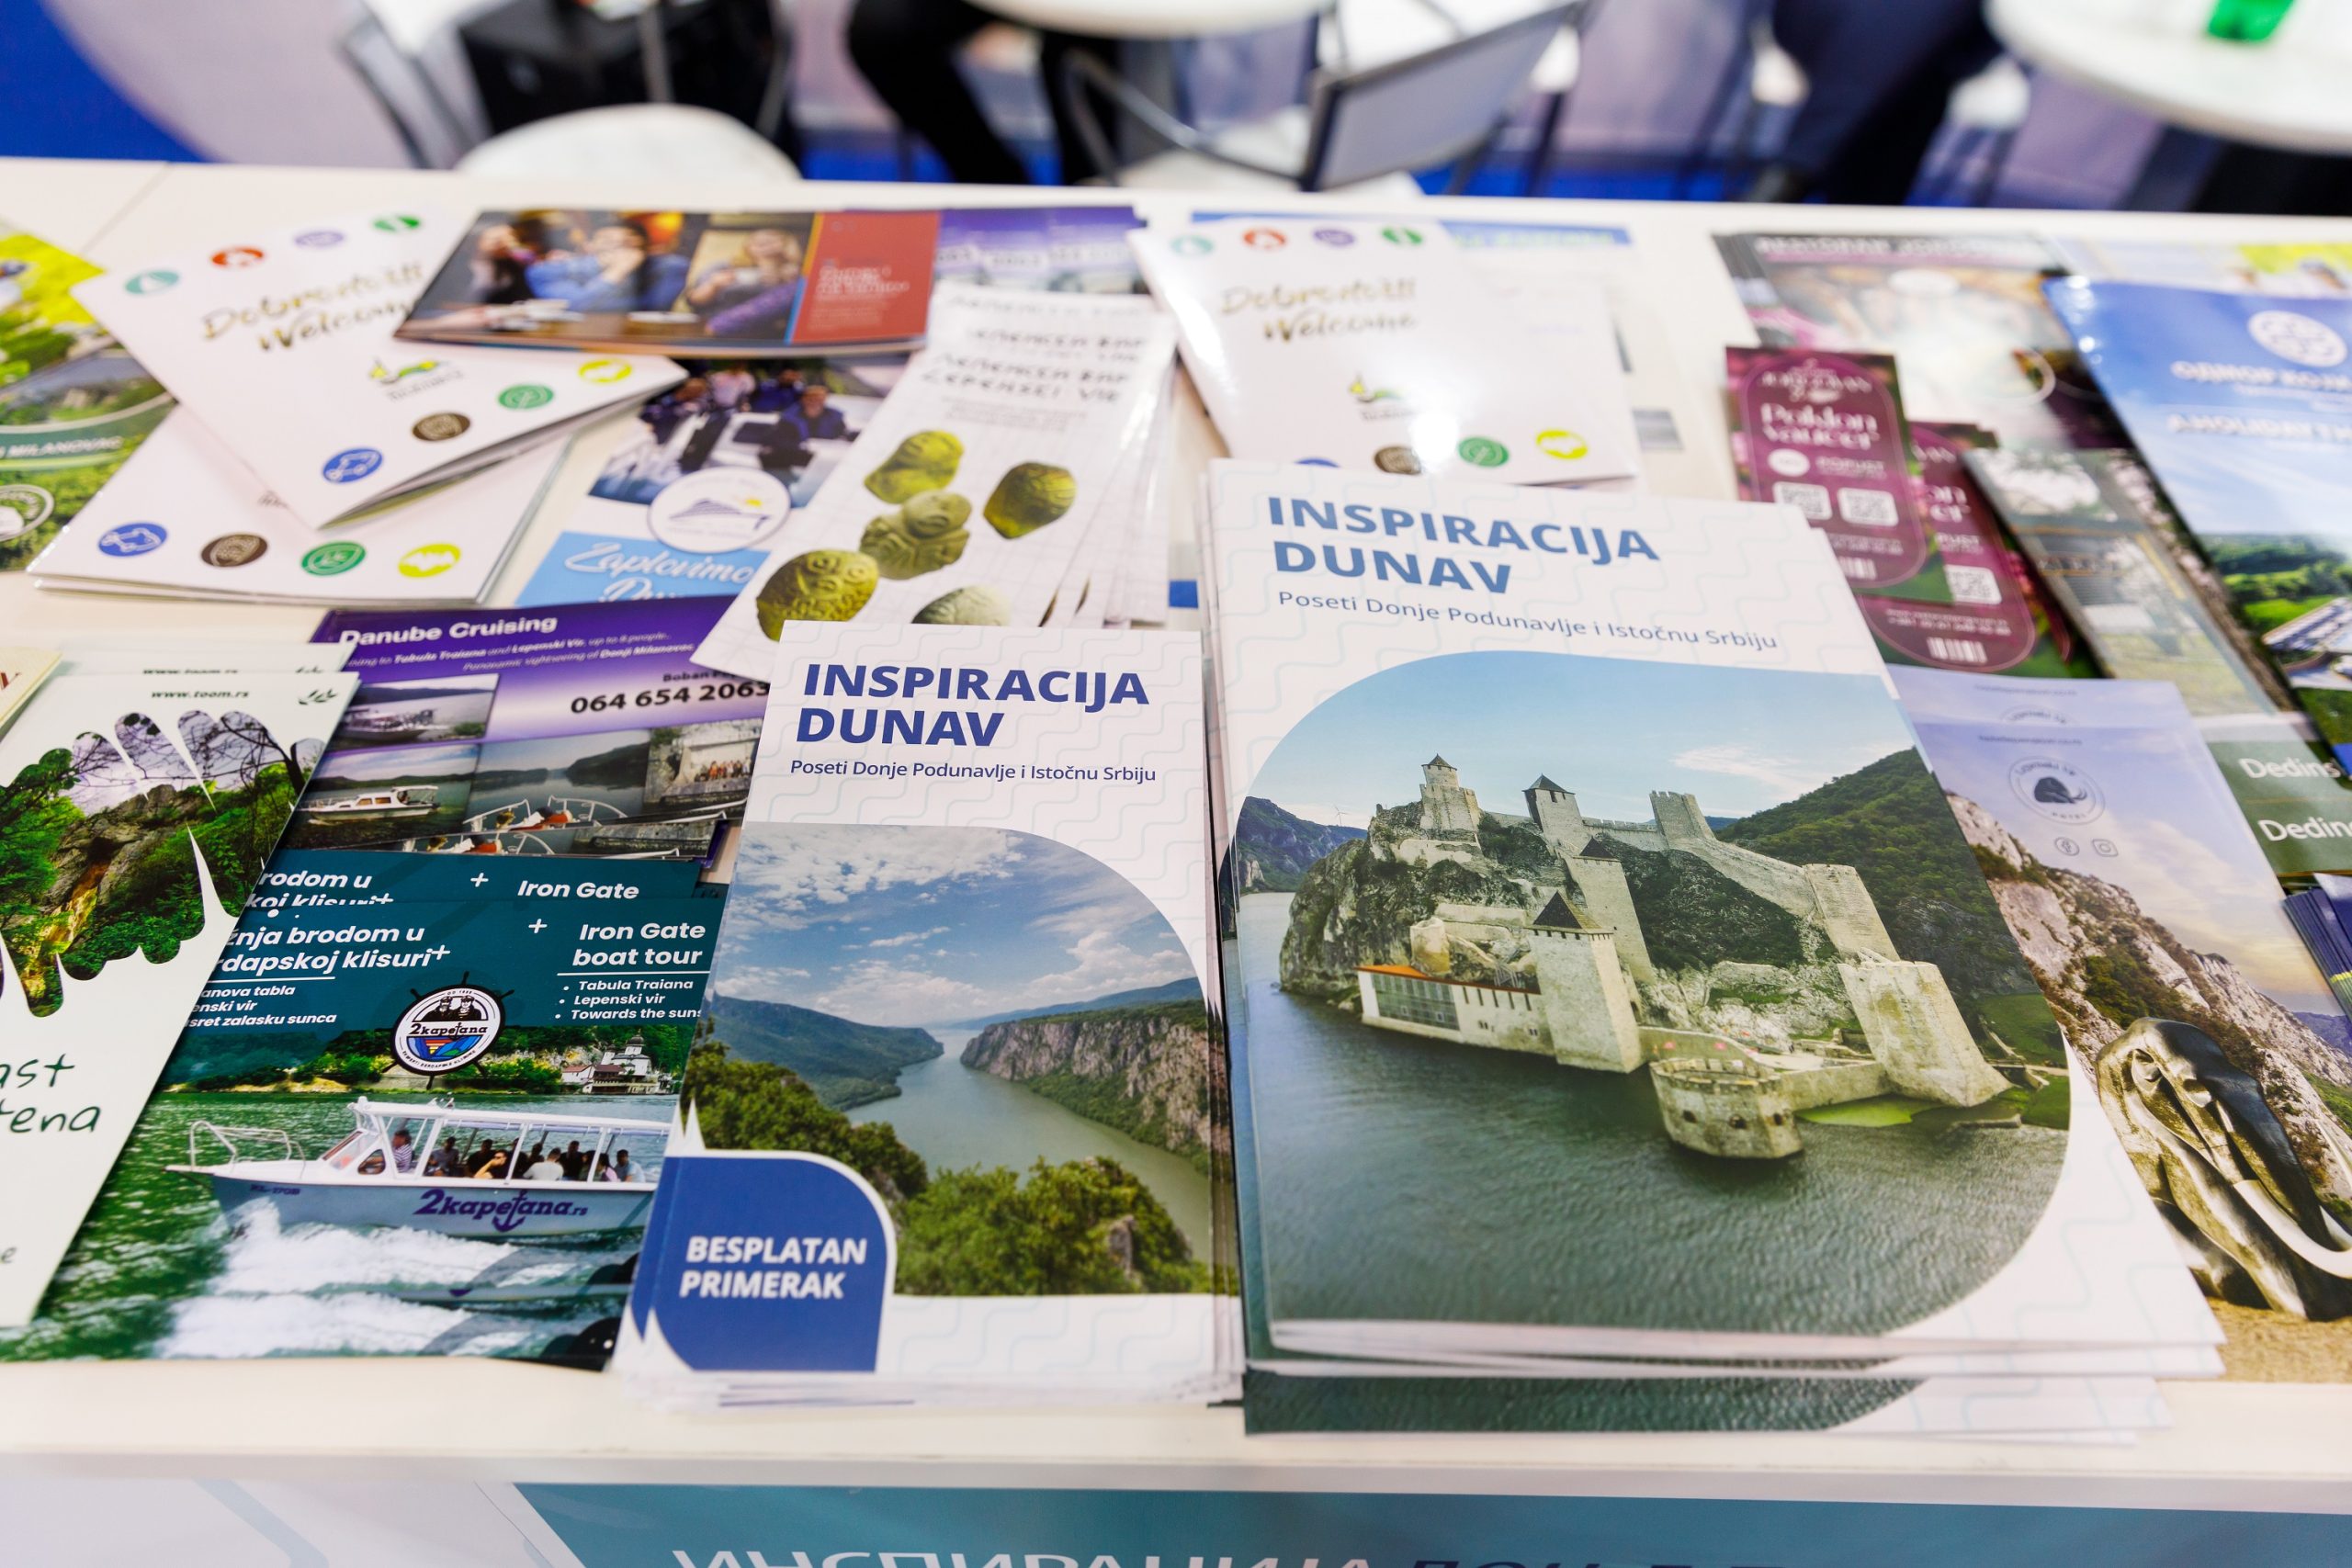 Successful performance at the 44th International Tourism Fair in Belgrade